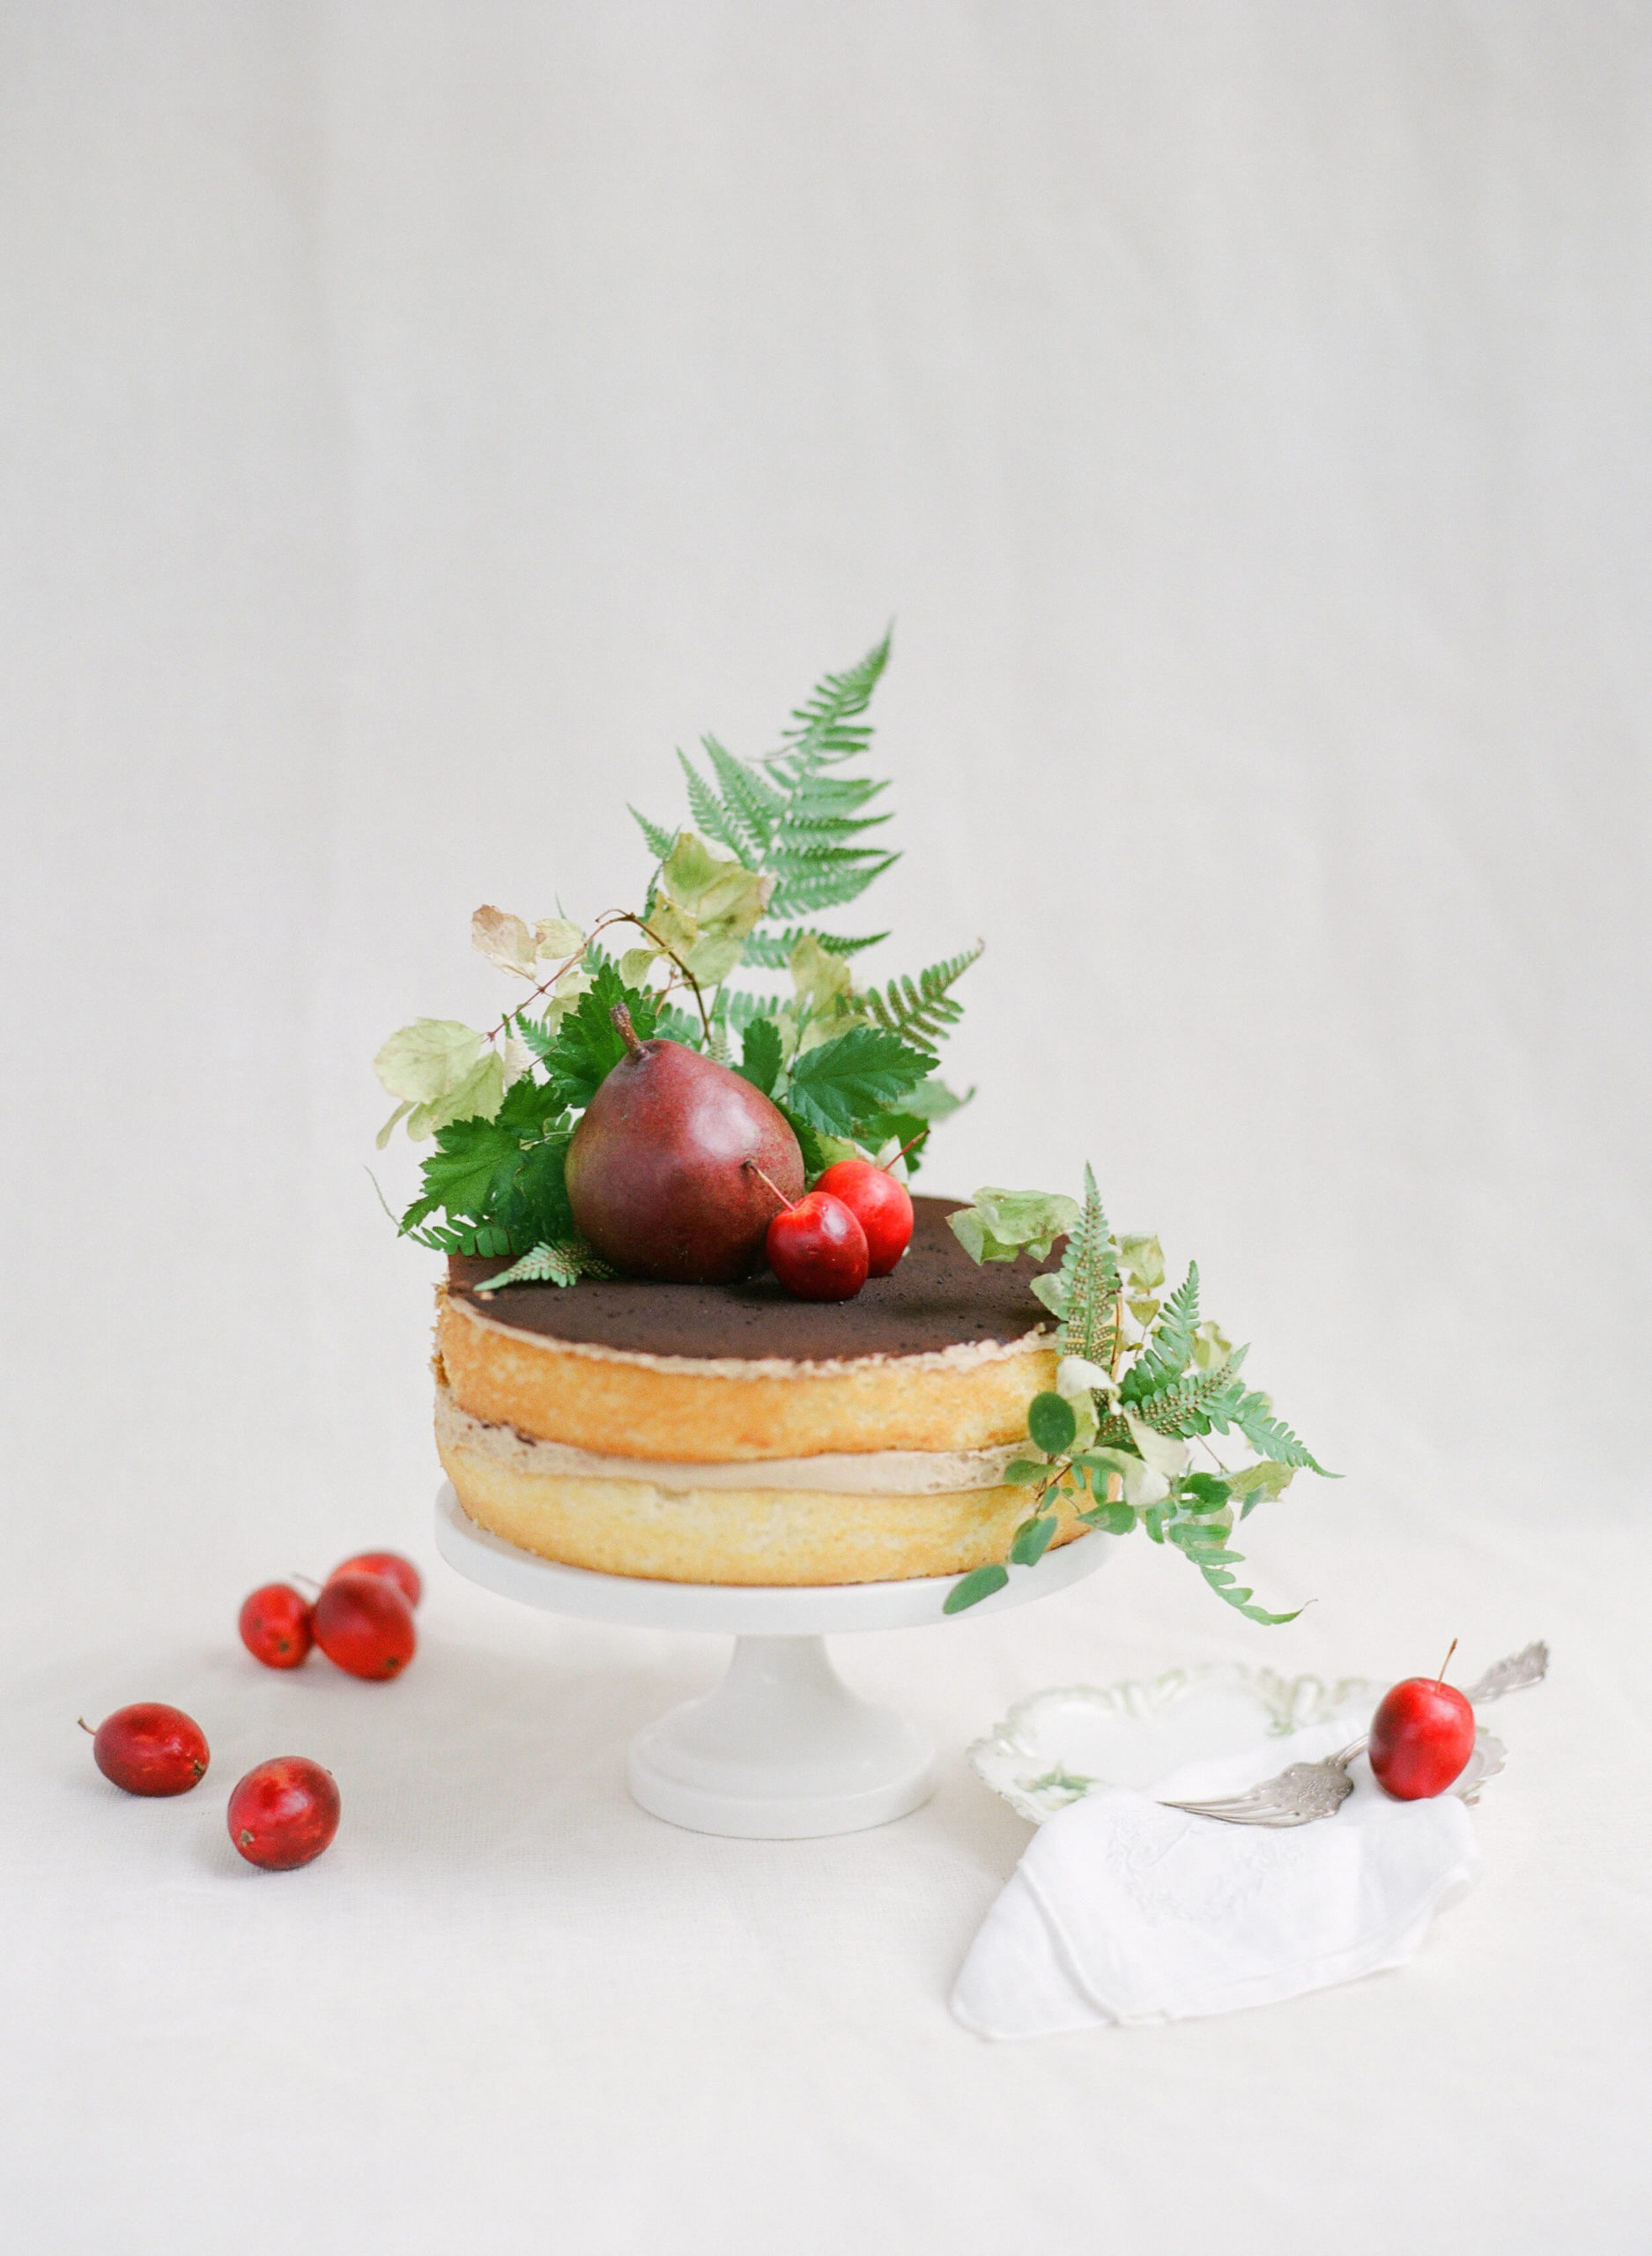 Joy Proctor finds inspiration and beauty baking at home and documenting with the KT Merry Presets.